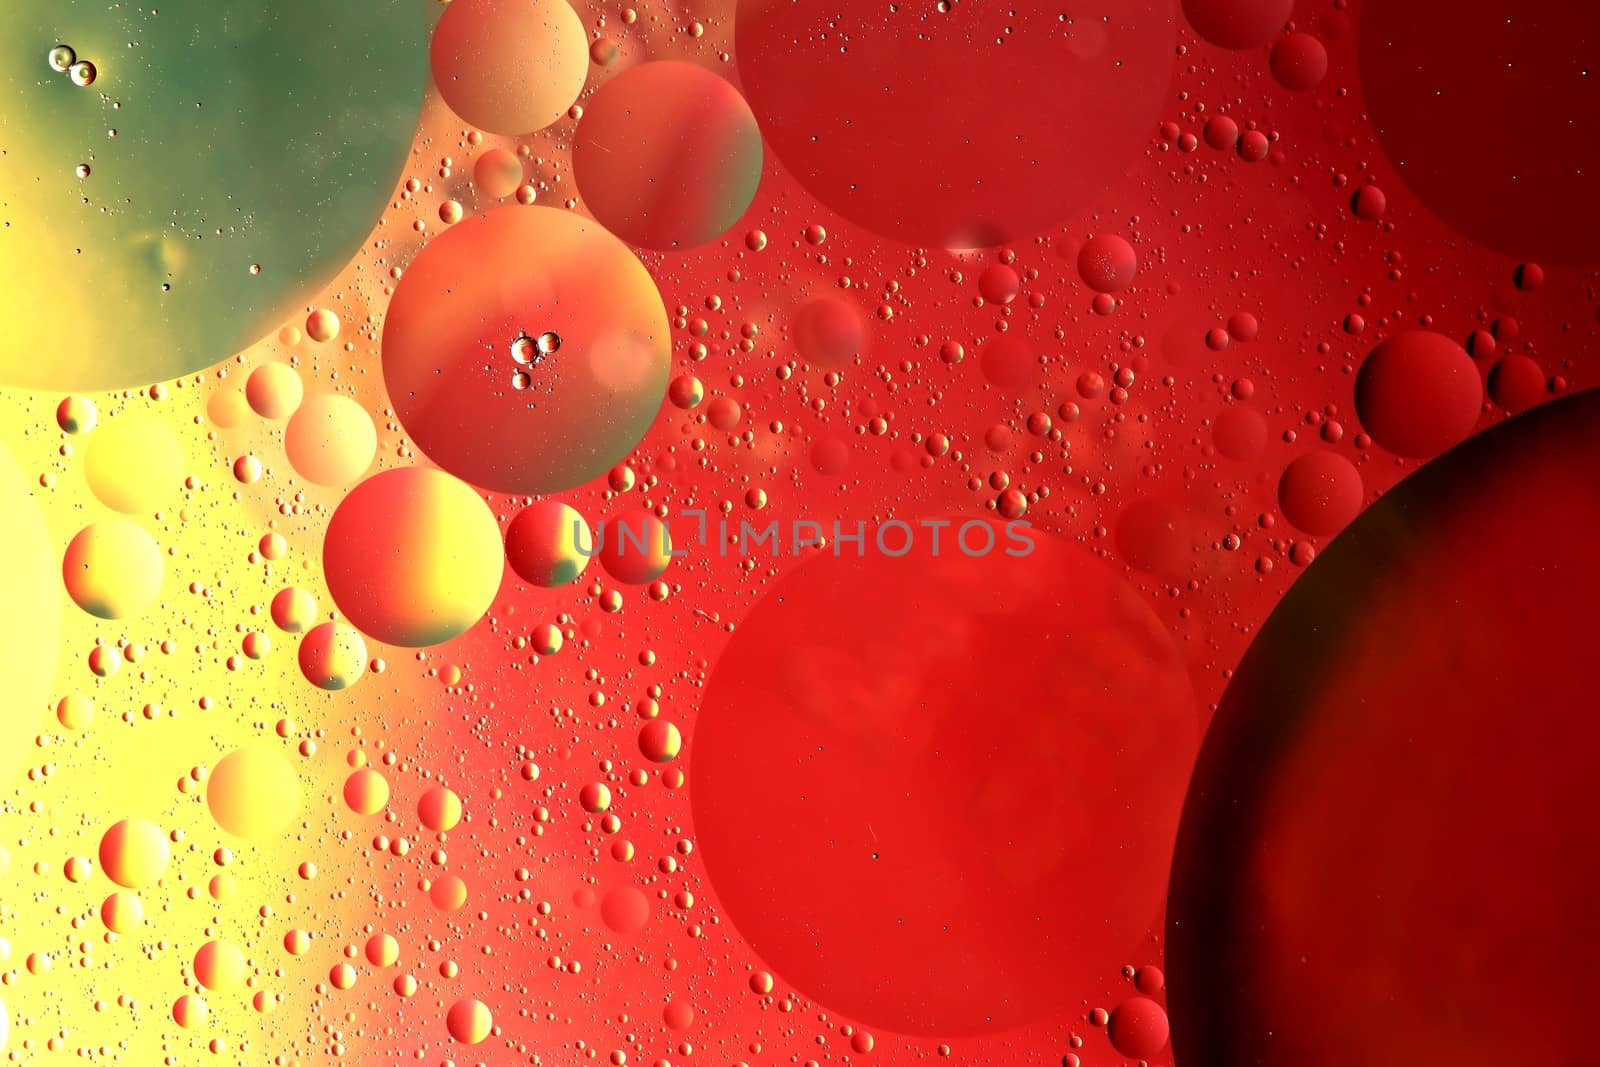 Abstract pattern of colored oil bubles on water looking like space galaxy